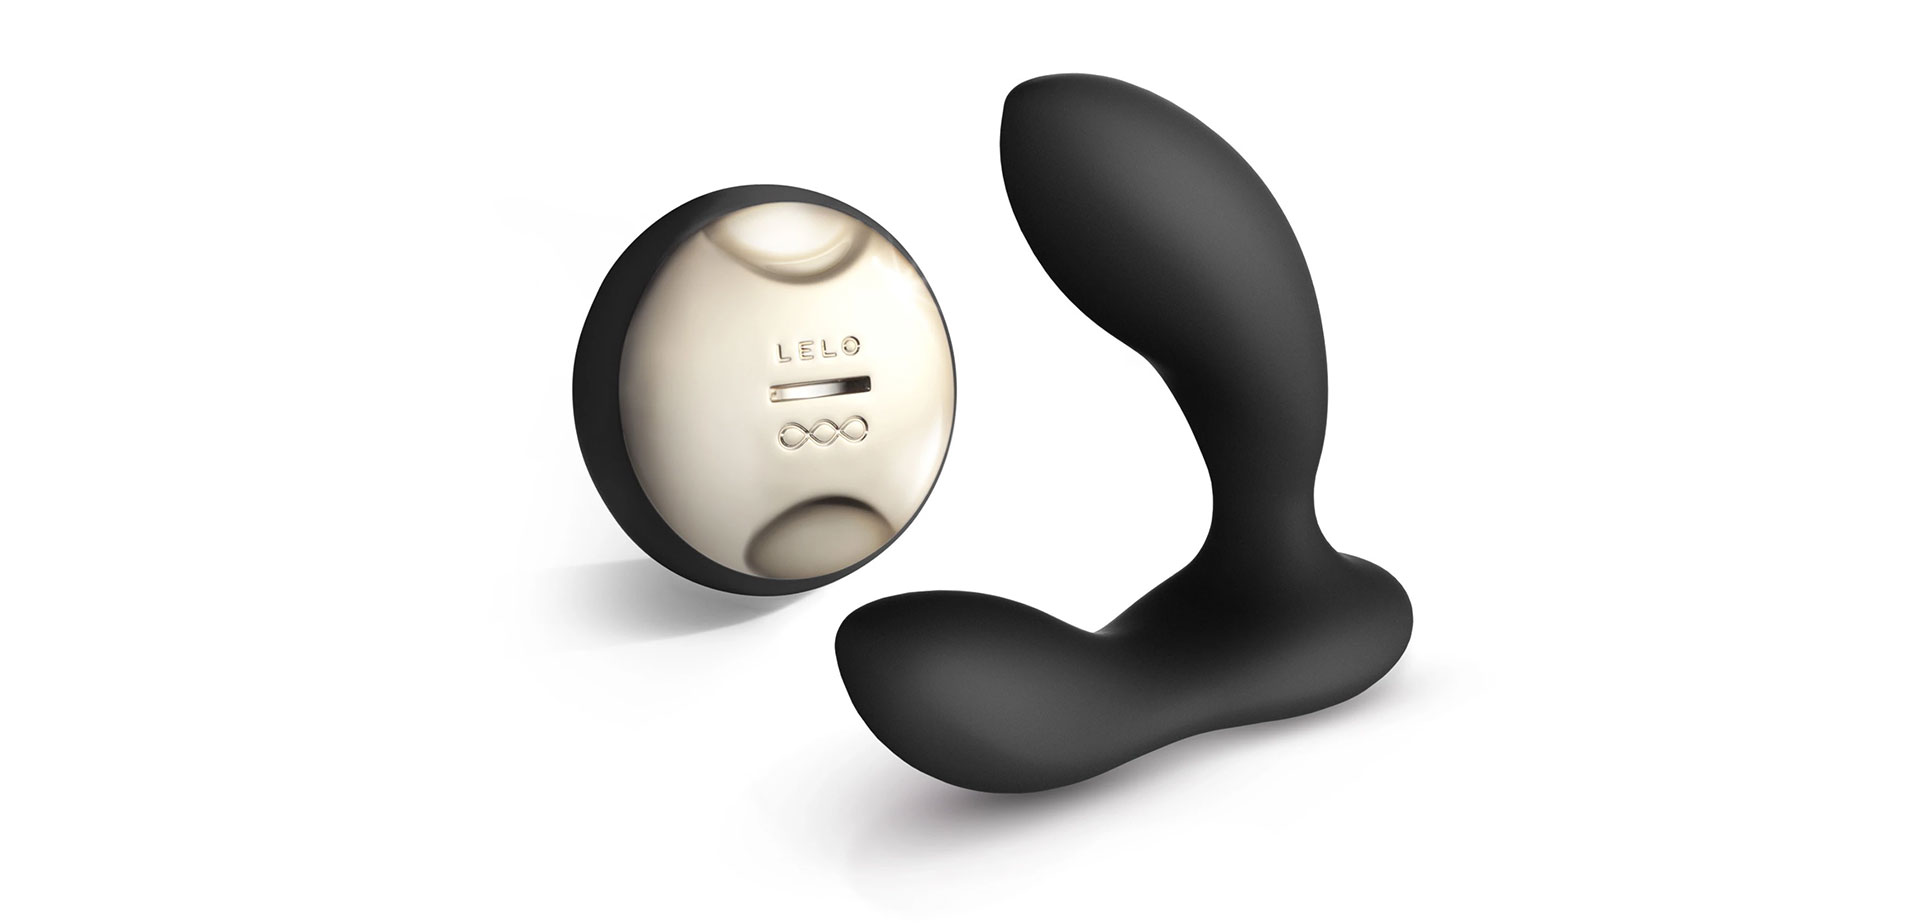 Rechargeable prostate massager with SenseMotion remote control from Lelo Hugo.